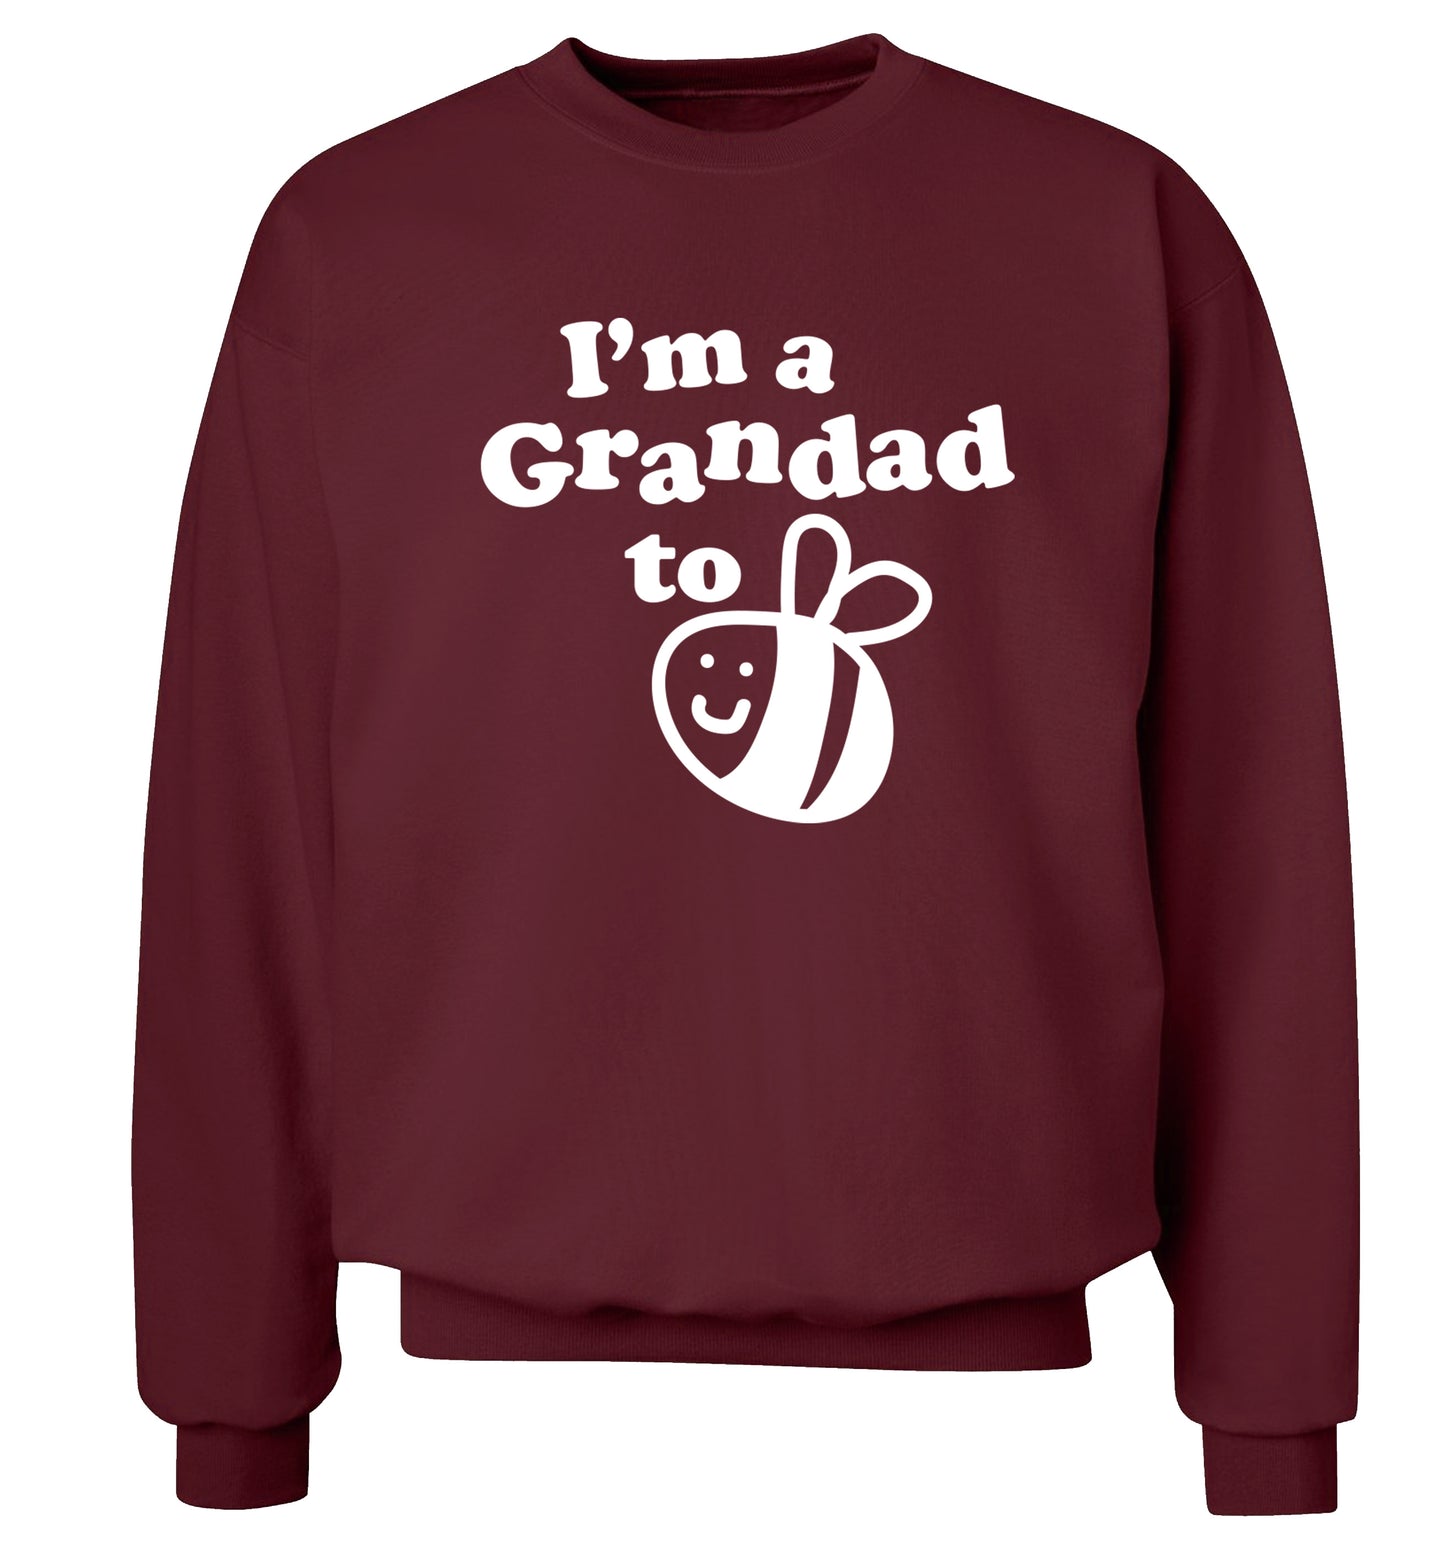 I'm a grandad to be Adult's unisex maroon Sweater 2XL